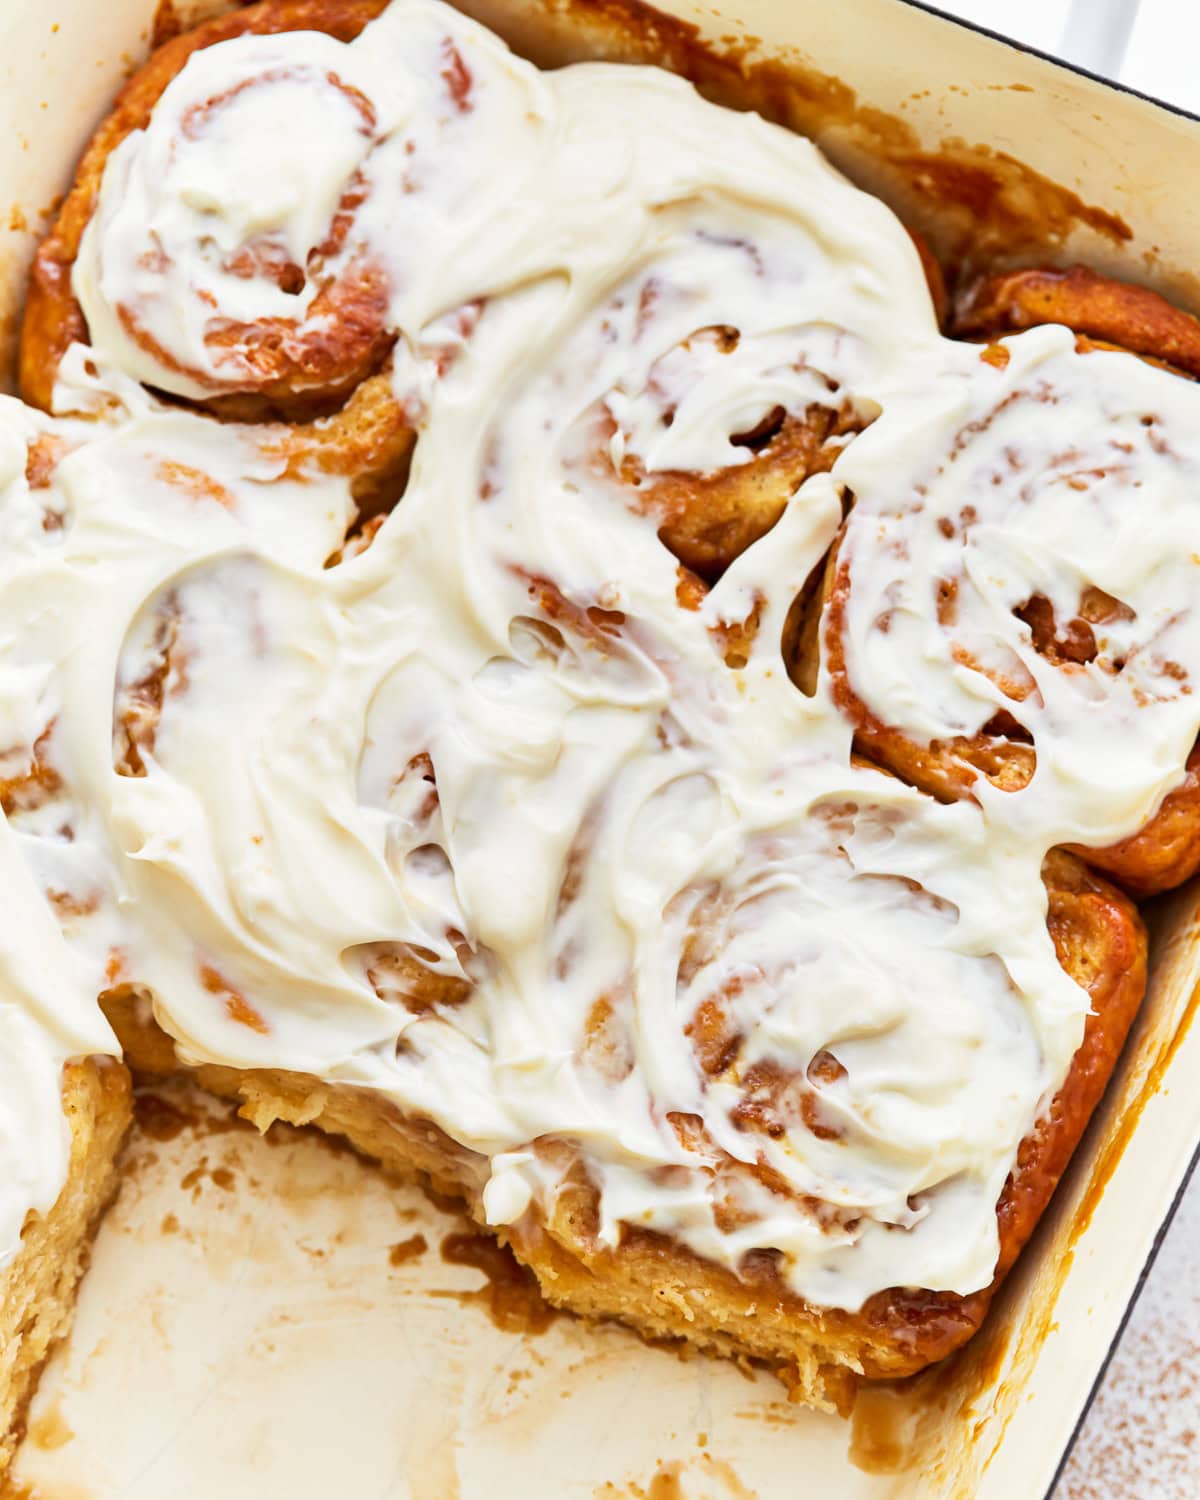 a tray of frosted gluten-free cinnamon rolls missing 2 rolls.